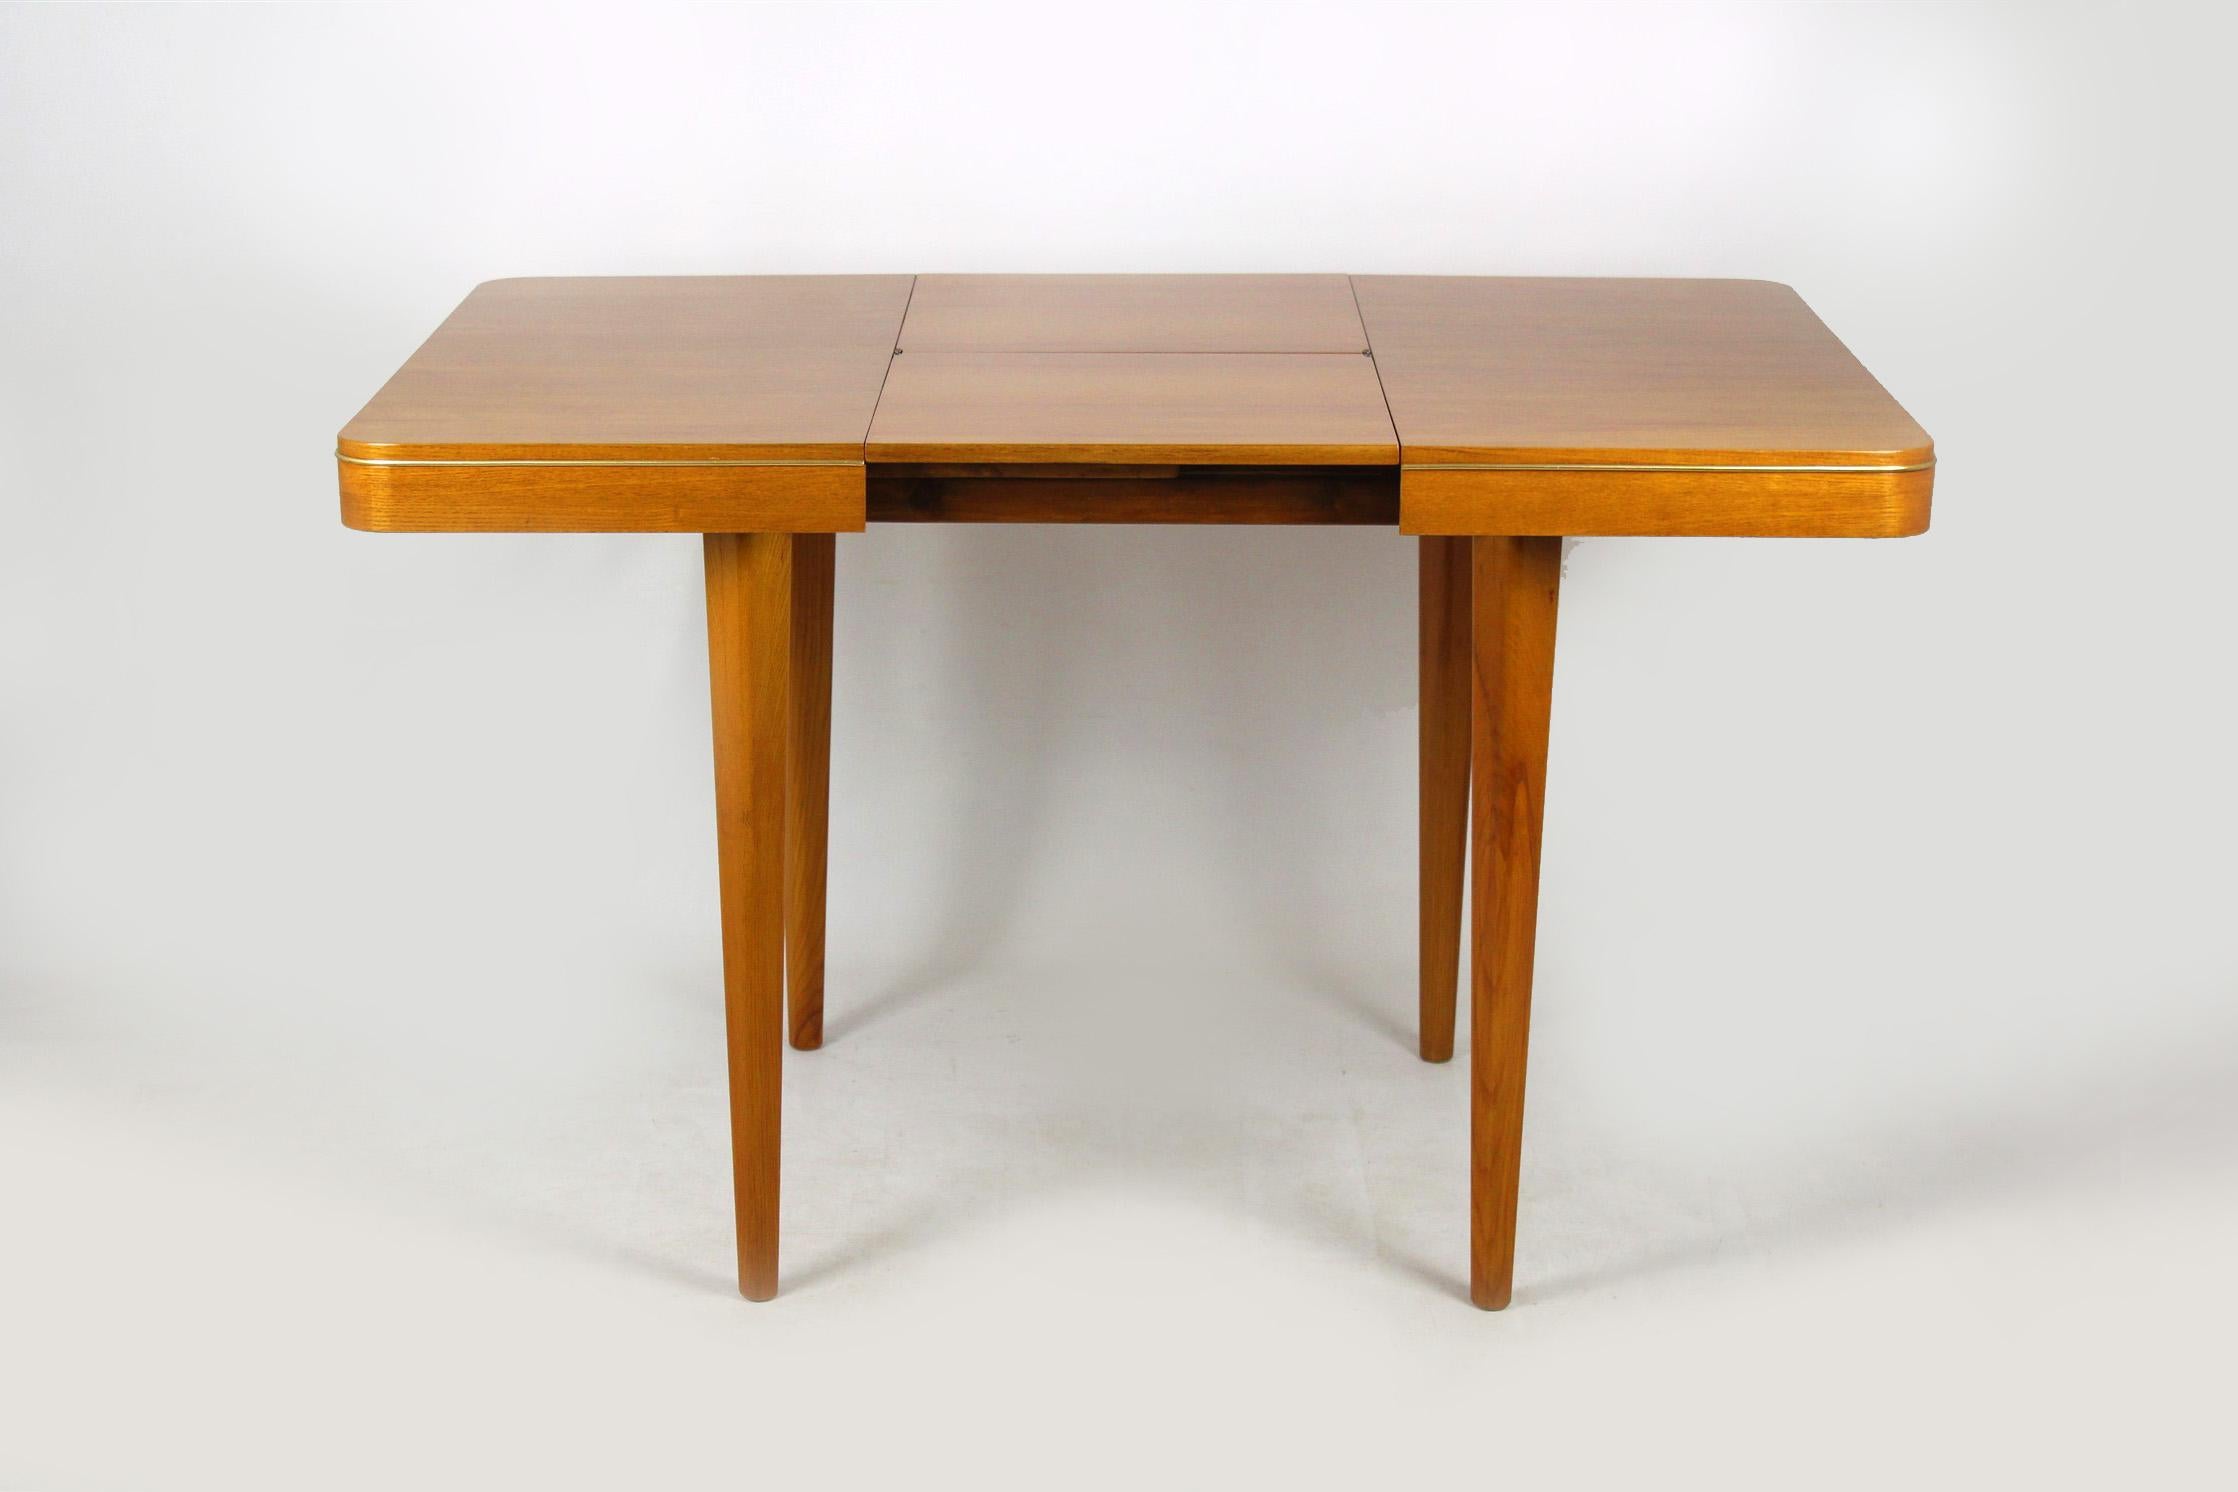 Square, oak veneered folding dining table, manufactured by Jitona in 1960s.
The table measures 125cm wide when fully extended.
Legs can be simply removed for transport or storage.